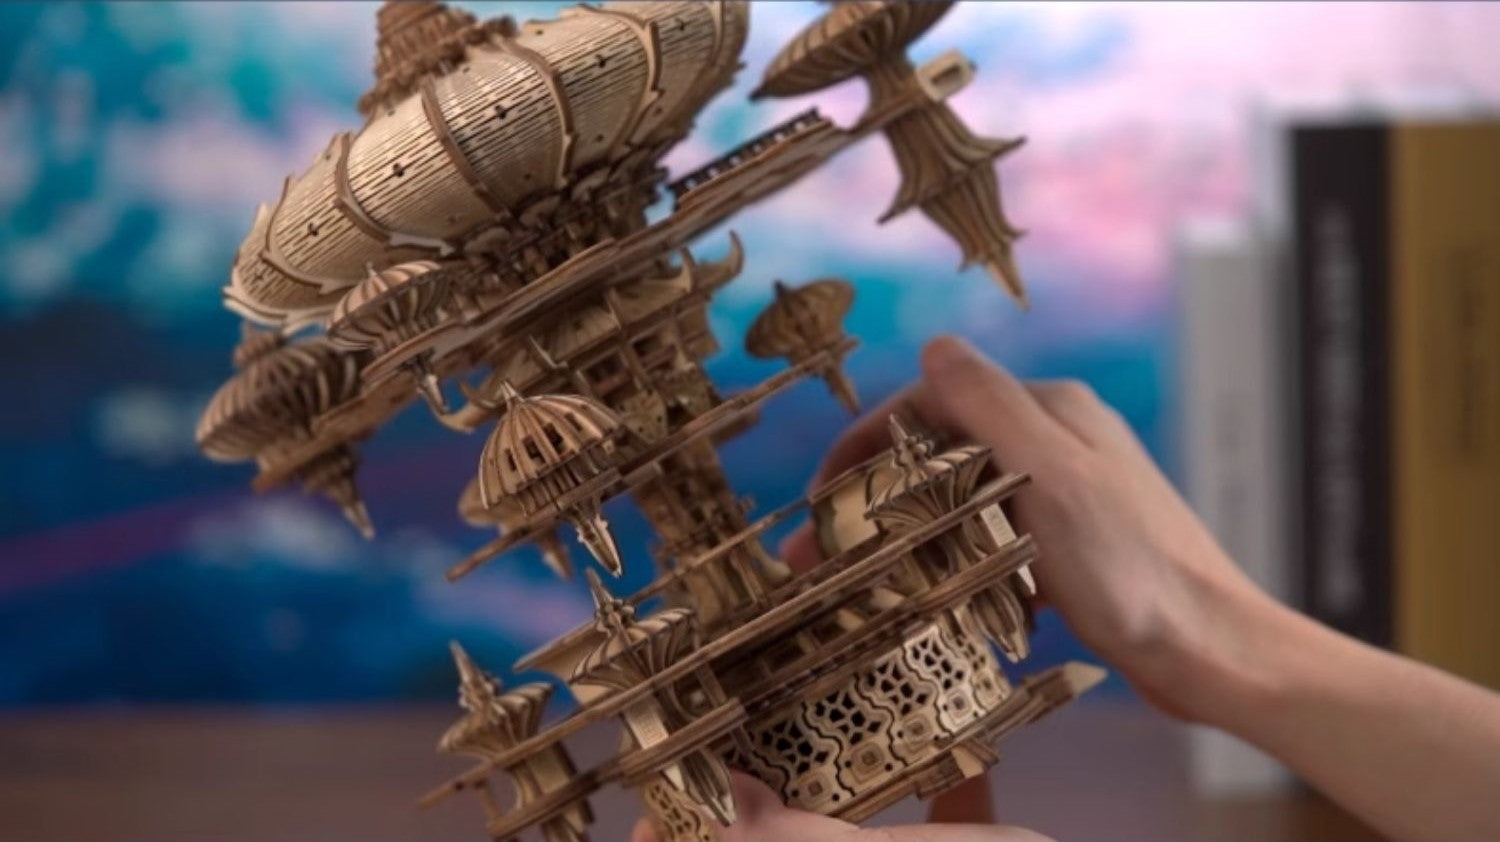 Castle In The Sky Diorama - Sky City 3D wooden mechanical Puzzles - DIY Music Box - Miniature Crafts